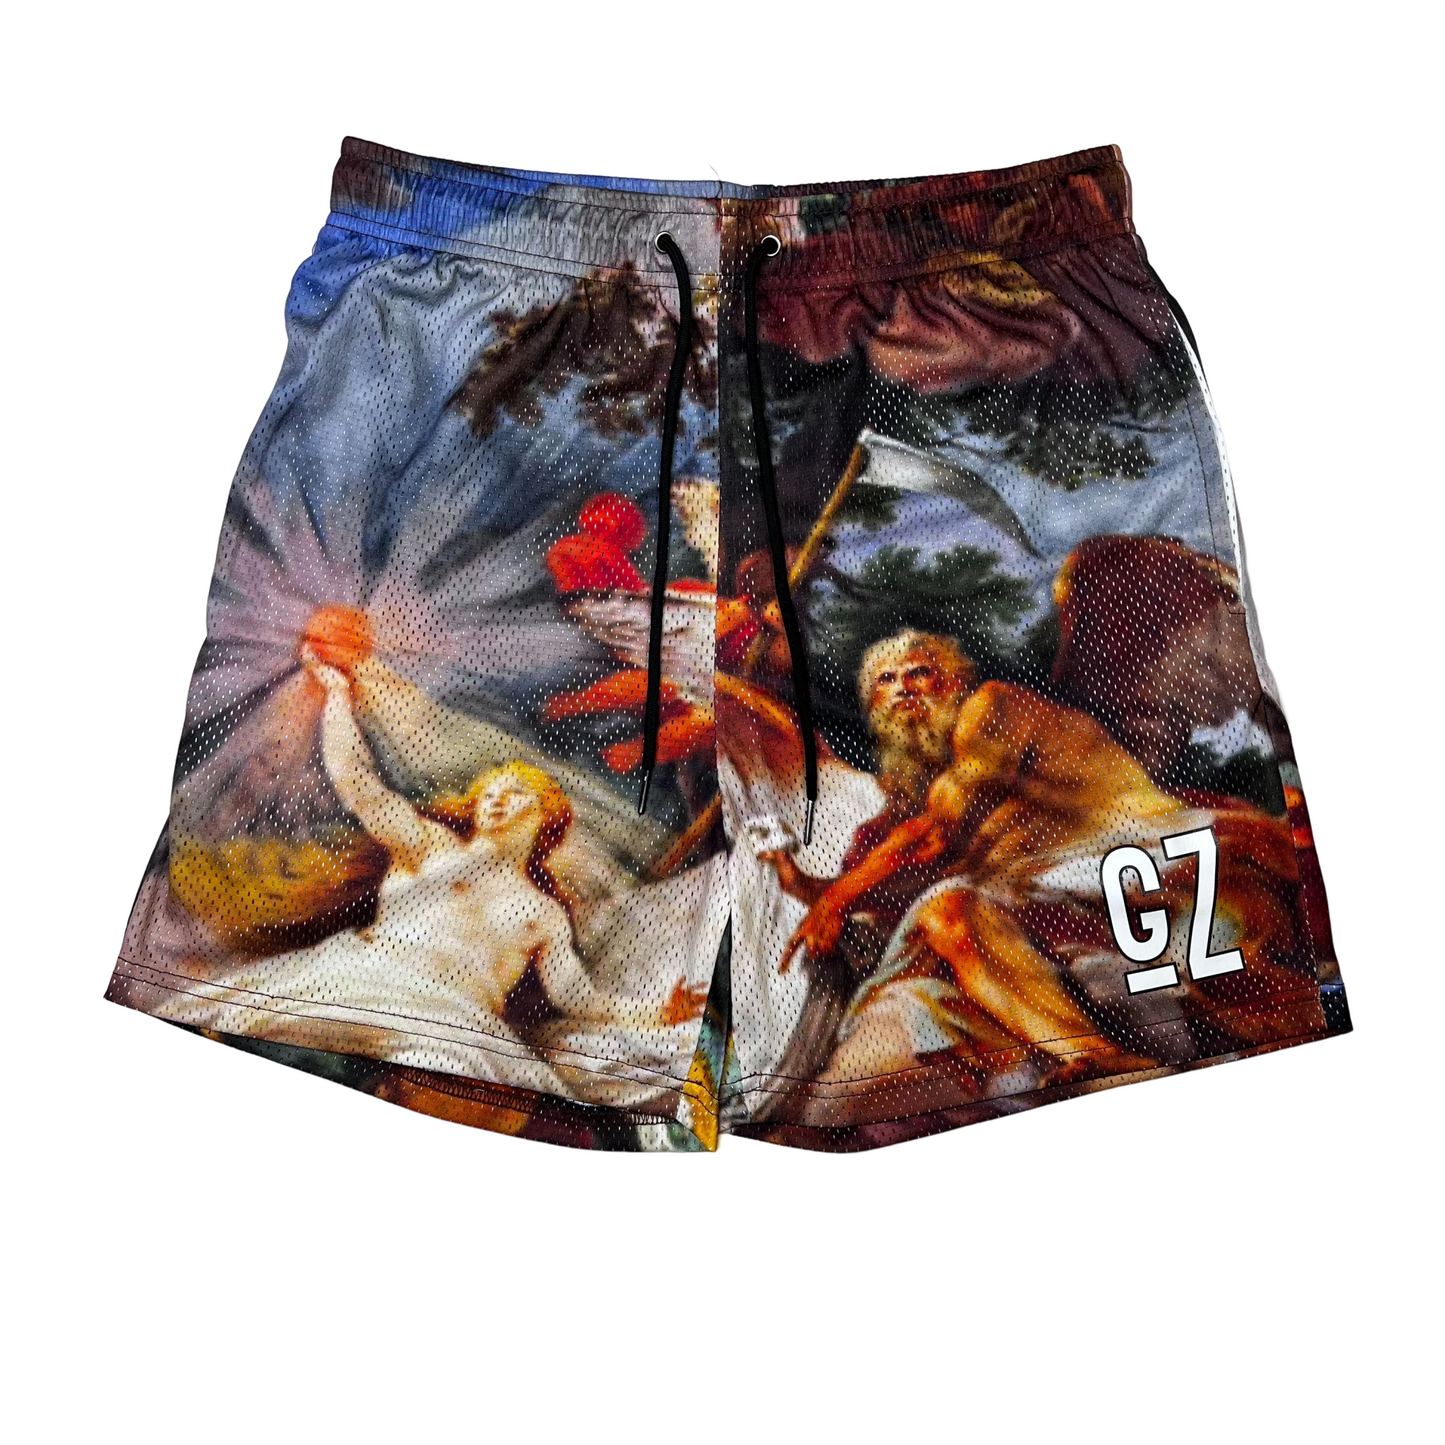 GZ Miami South Shore✥𝔾𝕣𝕠𝕦𝕟𝕕ℤ𝕖𝕣𝕠®✥2023 Southern suit boss/GZ American casual neutral sports outdoor battle of the gods four-point shorts and ball pants 